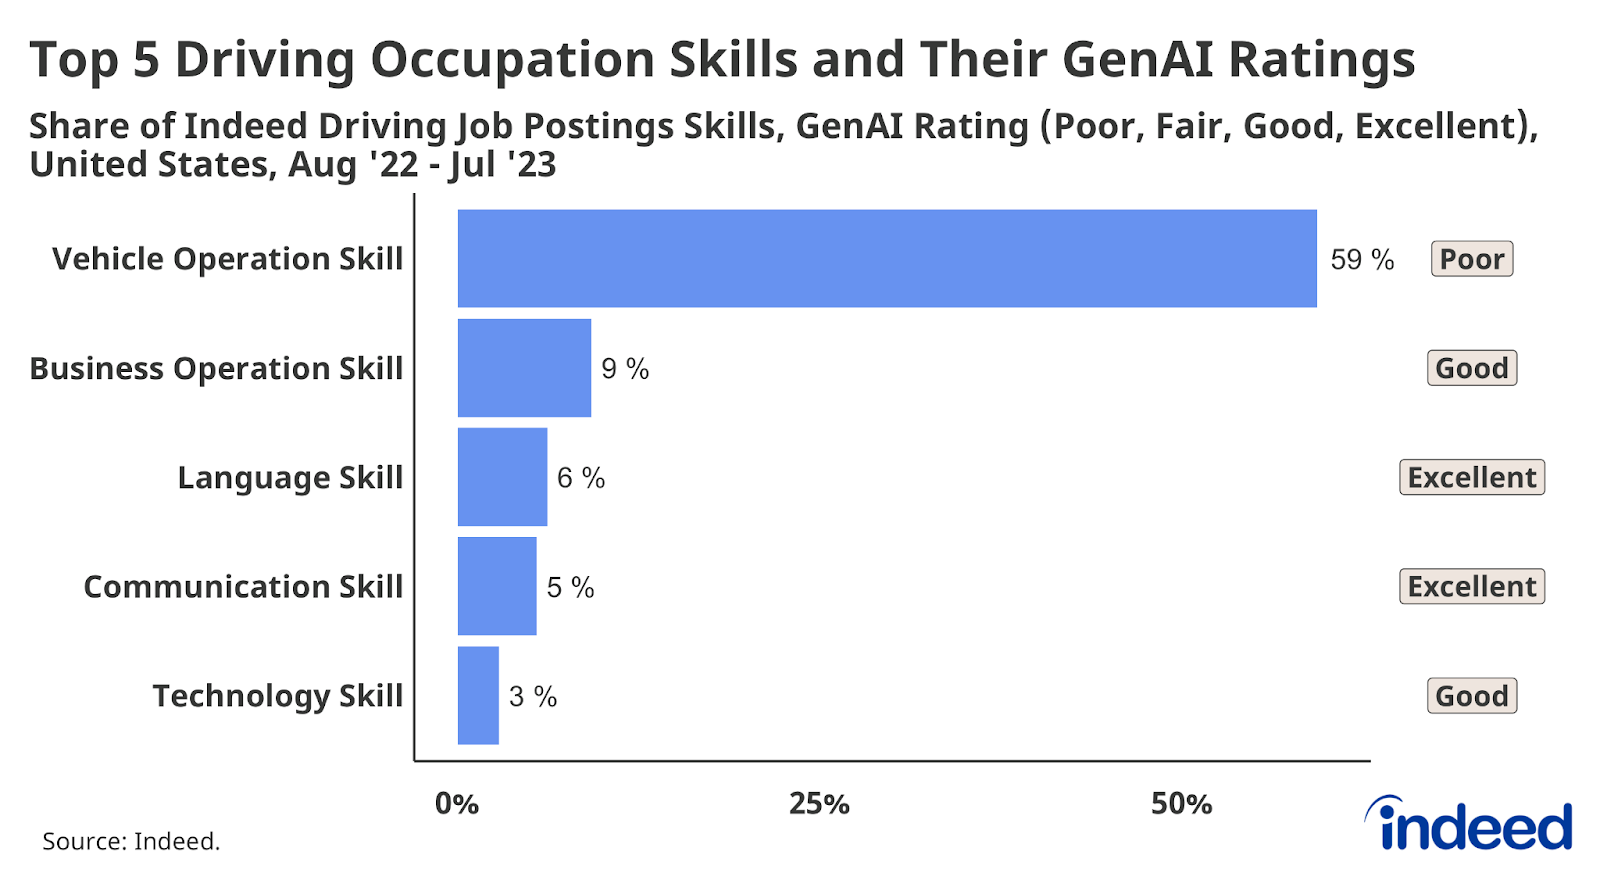 Bar graph titled “Top 5 Driving Occupation Skills and Their GenAI Ratings.” With a vertical axis comprising the five driving skills, and a horizontal axis of 0% to 59%, the graph shows the GenAI rating for each share of job postings skills.